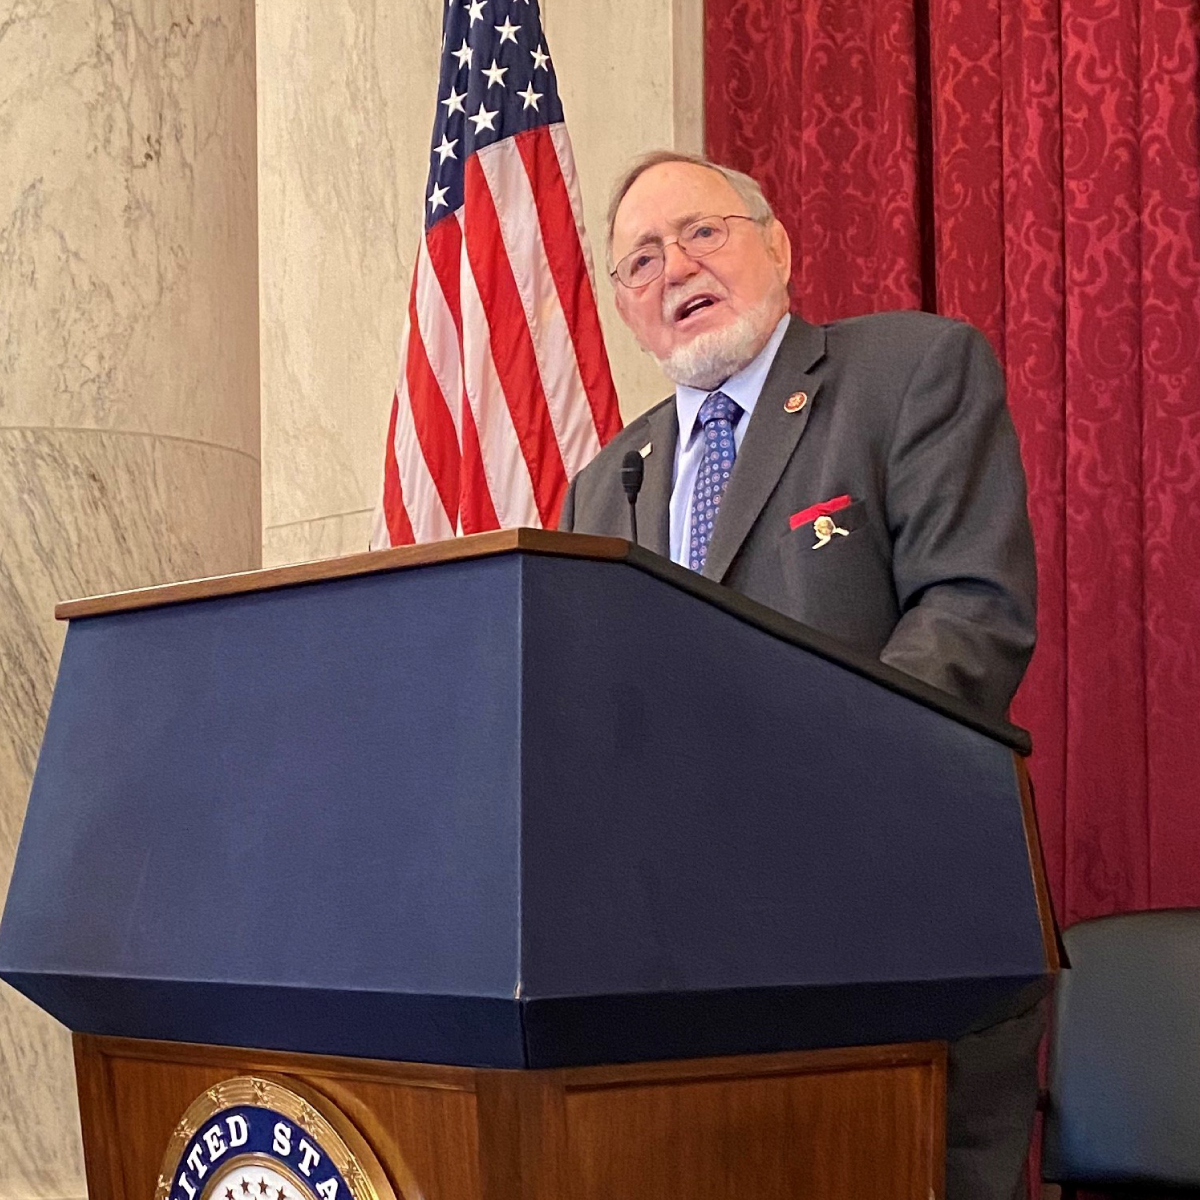 Don Young was a giant of a man who, in one way or another, positively affected every Alaskan's life. Today, we honor a record-setting 49 years as our Congressman.